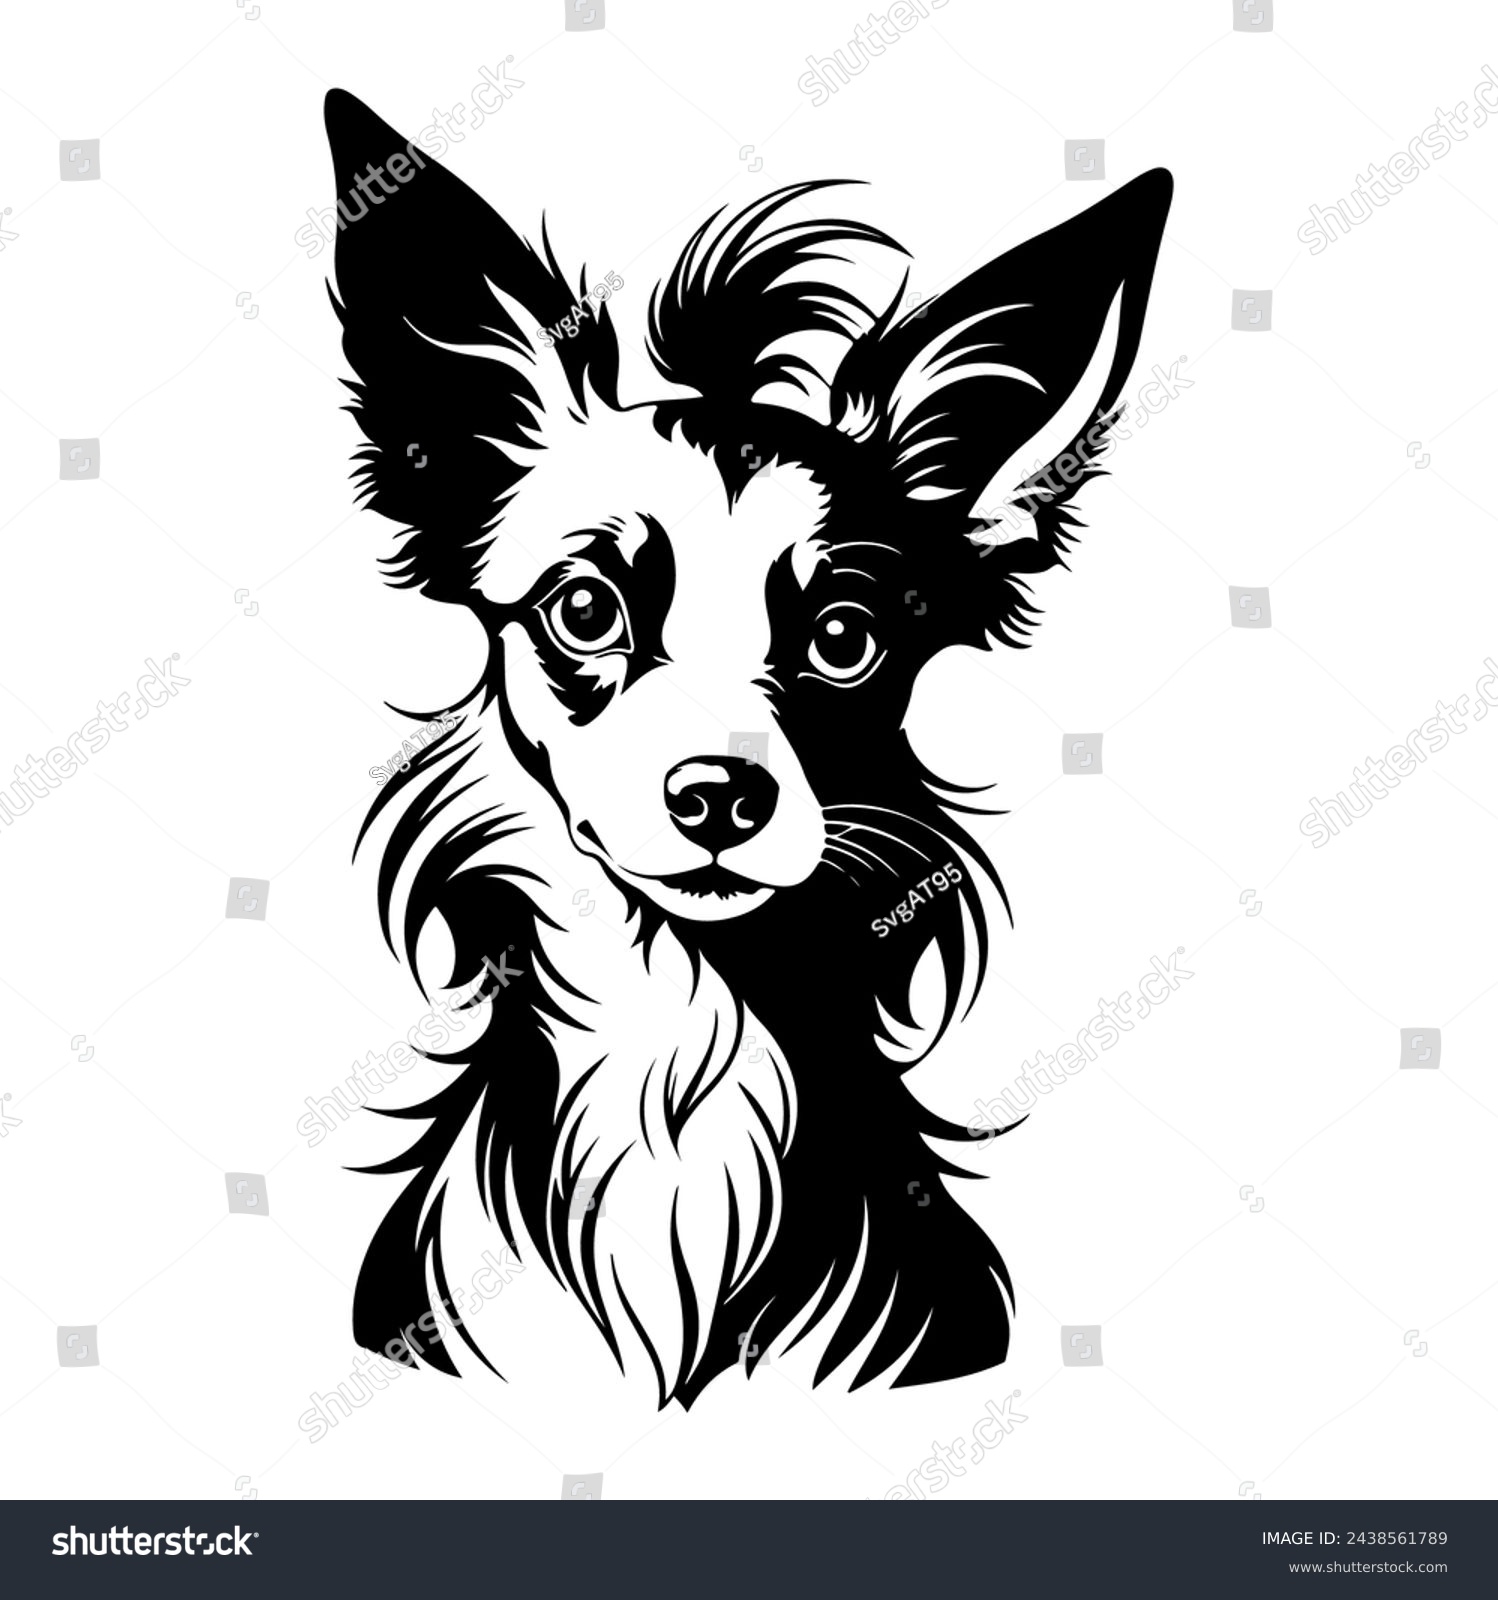 SVG of Portrait of a Chinese Crested Dog Vector isolated on white background, Dog Silhouettes. svg